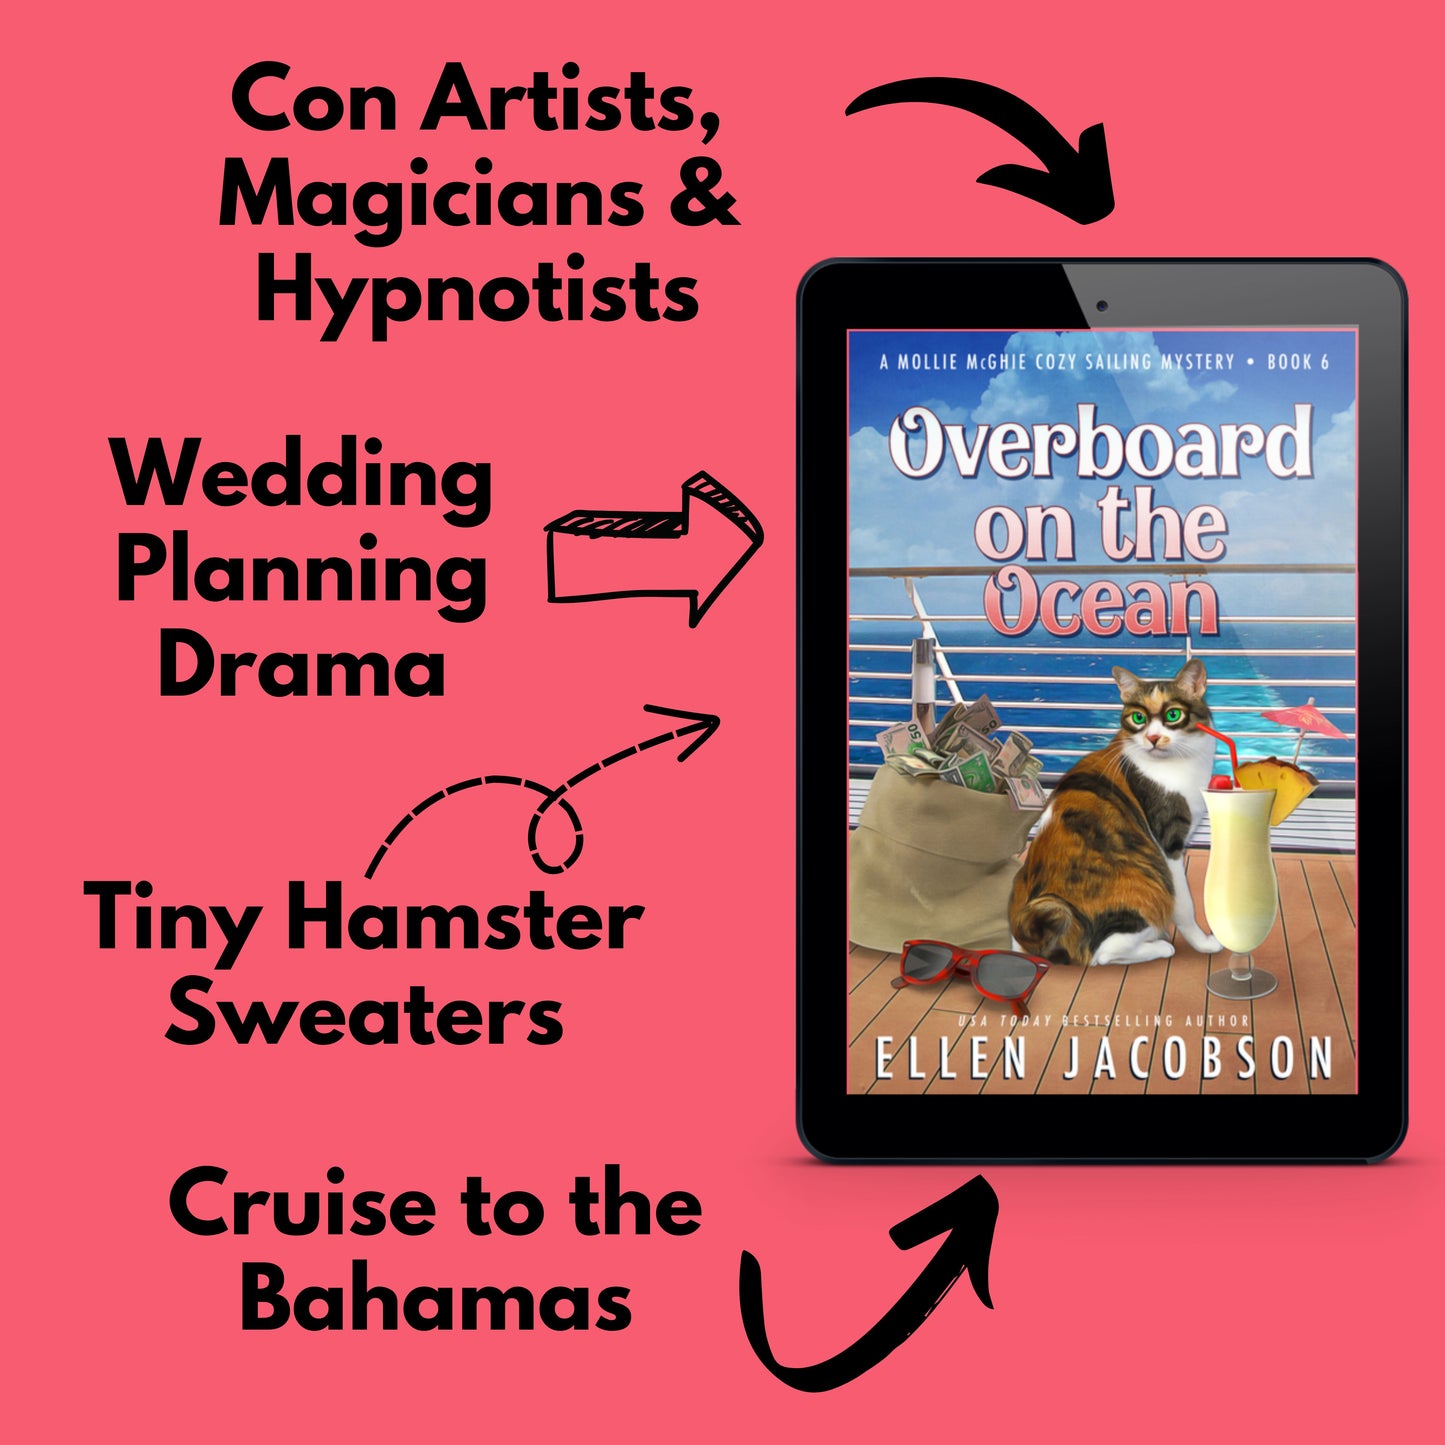 Overboard on the Ocean (Mollie McGhie Cozy Mystery #6) ebook cover with text that says con artisits, magicians & hypnotists, wedding planning drama, tiny hamster sweaters, and a cruise to the Bahamas